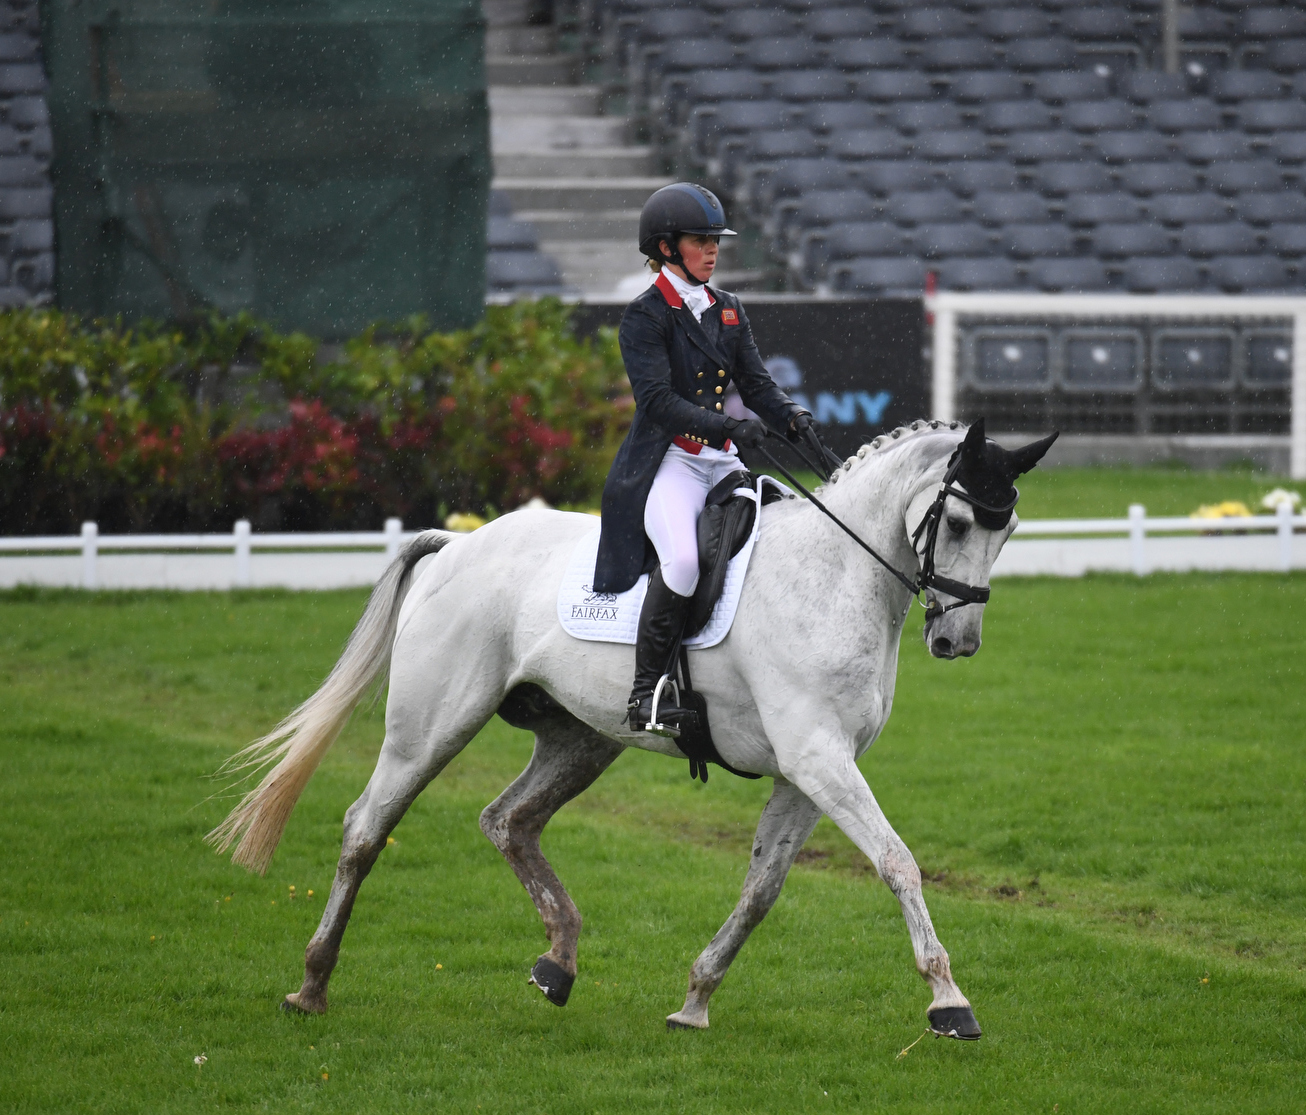 Ros Canter is Crowned Queen of the Dressage at Badminton